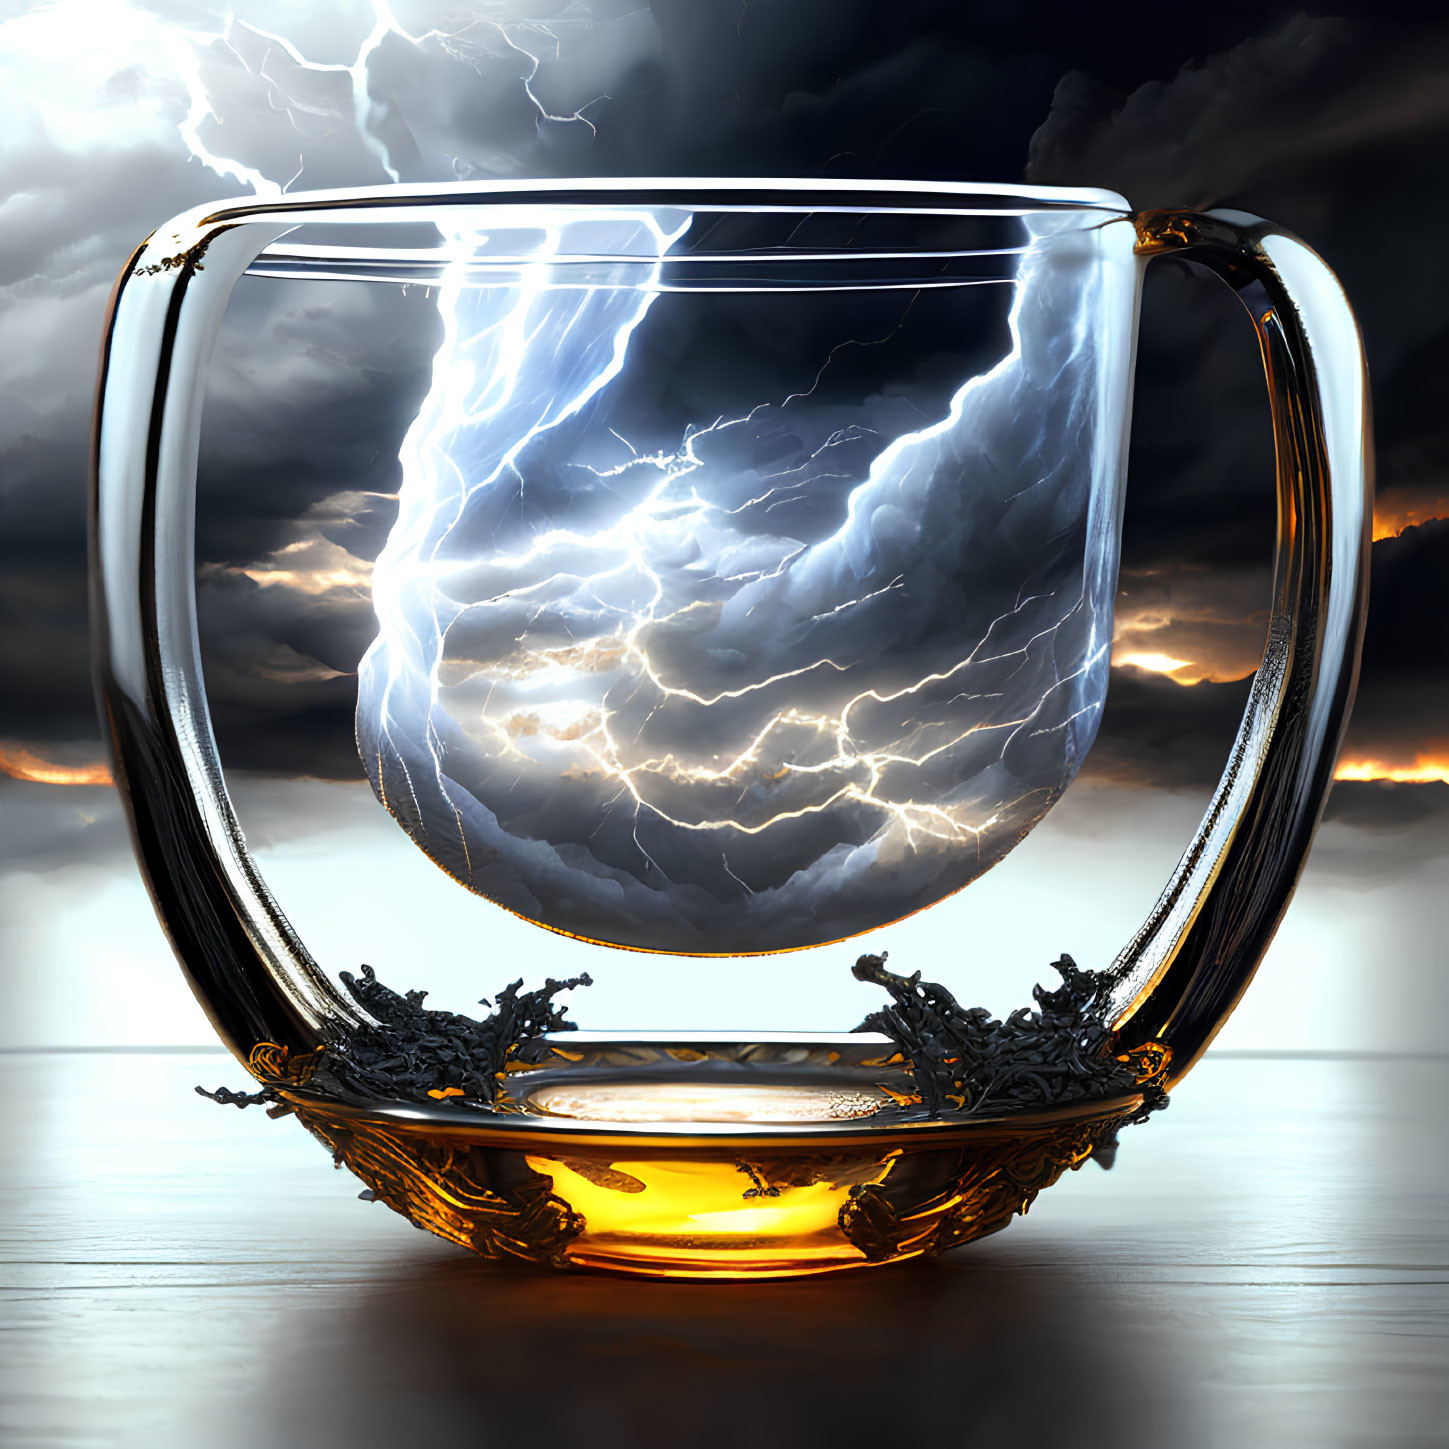 Glass cup with storm and lightning design on wooden surface with golden details